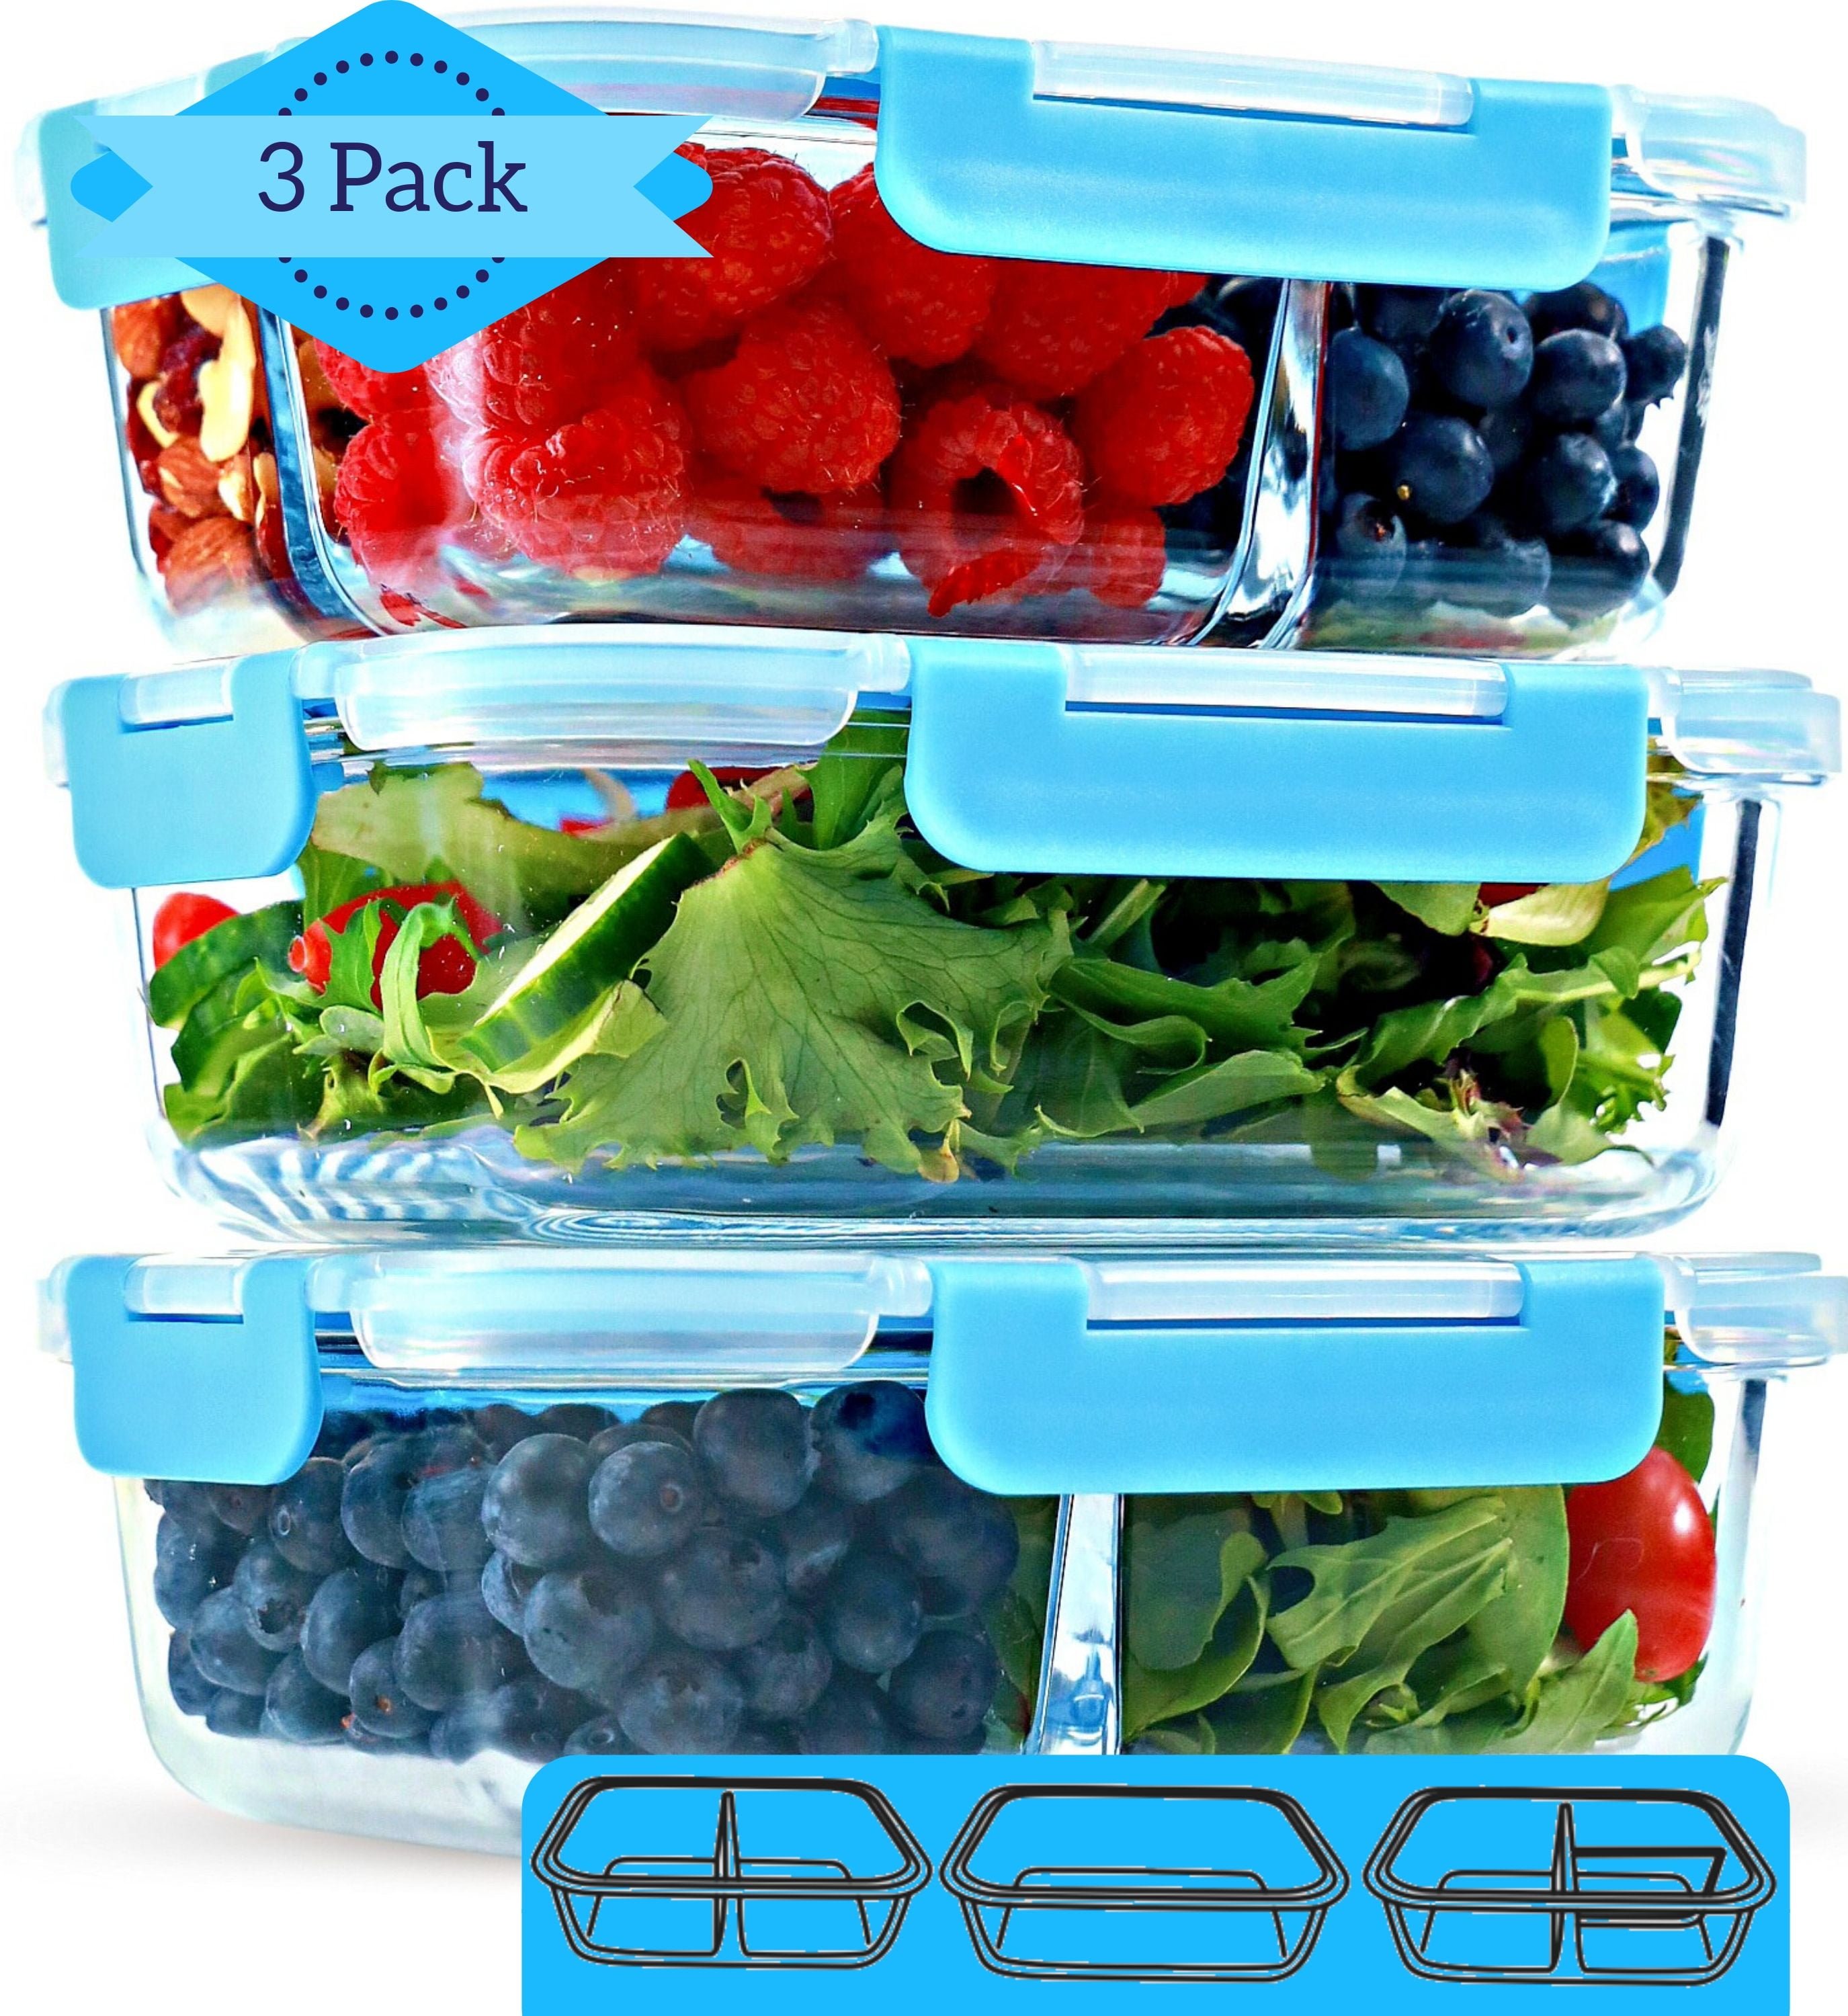 1 & 2 & 3 Compartment Glass Meal Prep Containers (3 Pack, 35 oz) - Glass  Food Storage Containers with Lids, Glass Bento Box Containers, Portion